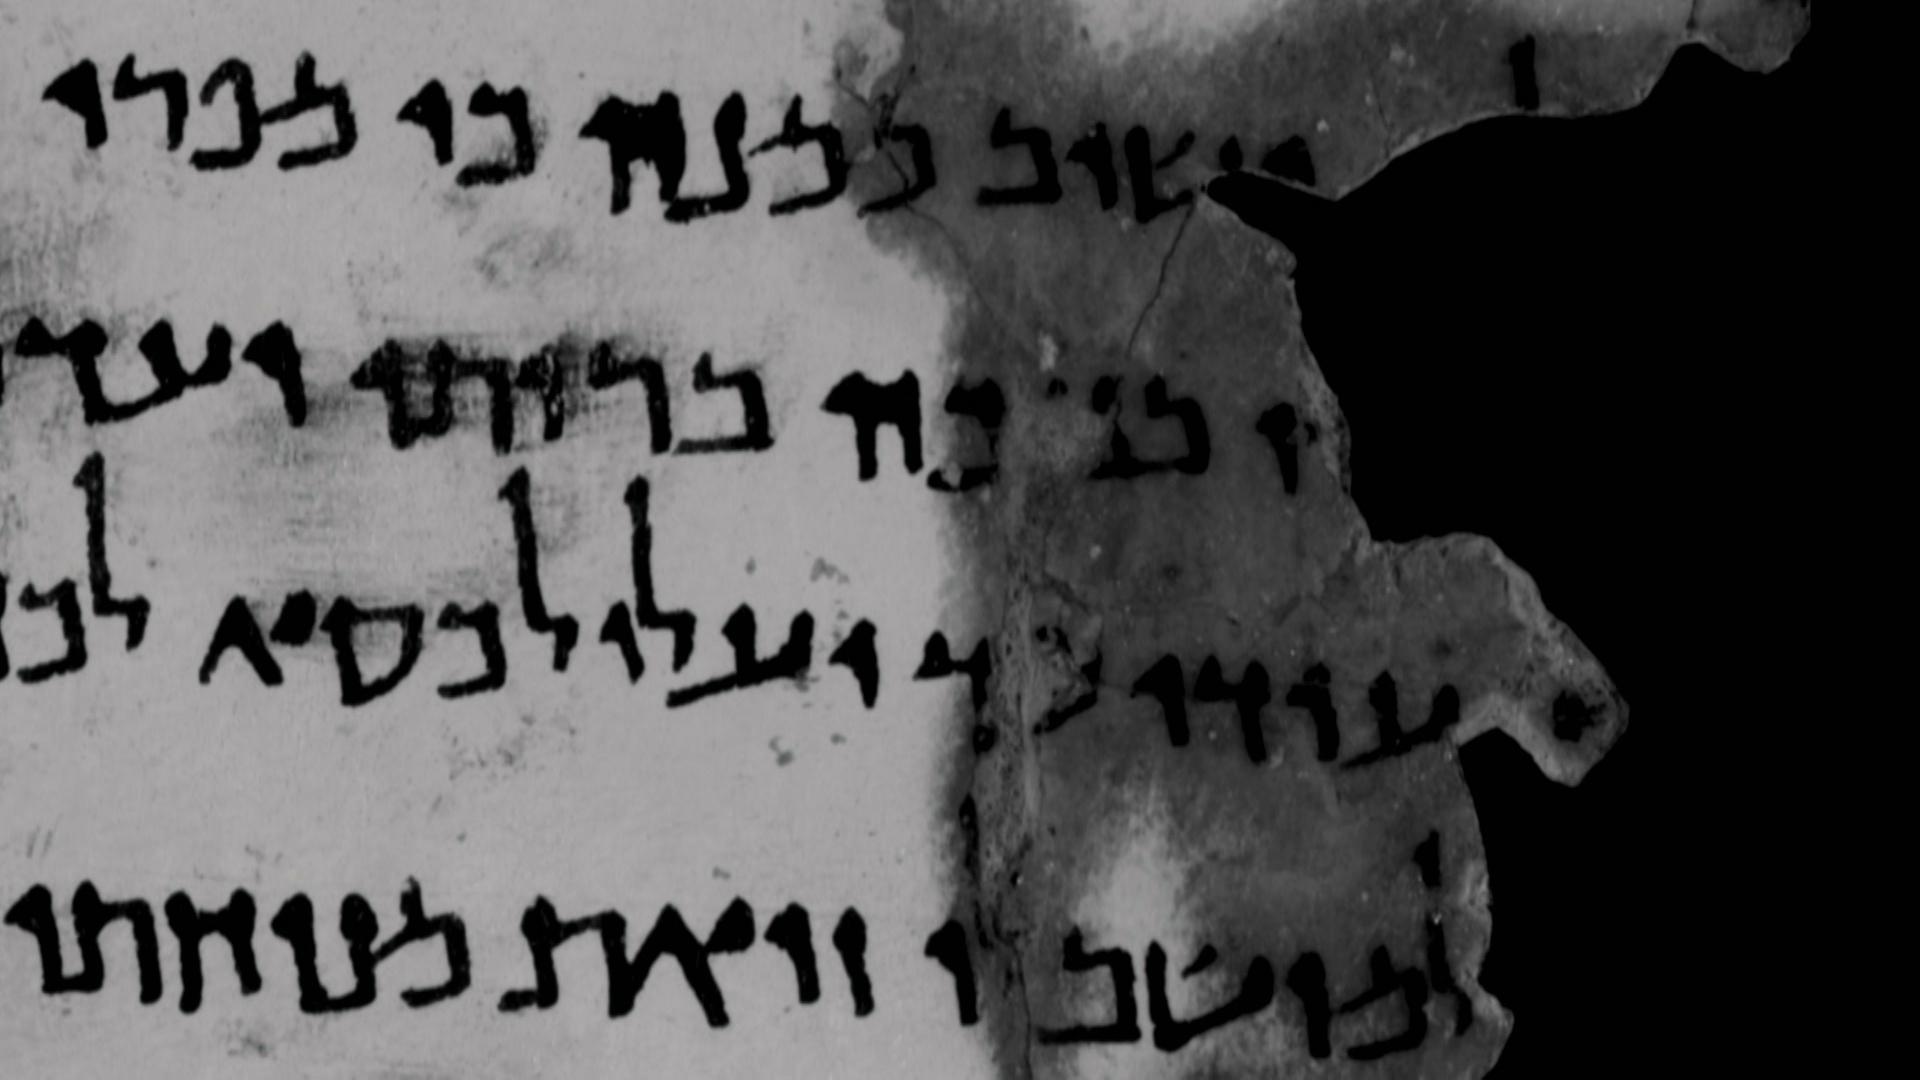 The Discovery Of The Dead Sea Scrolls  A Moment of Science - Indiana  Public Media